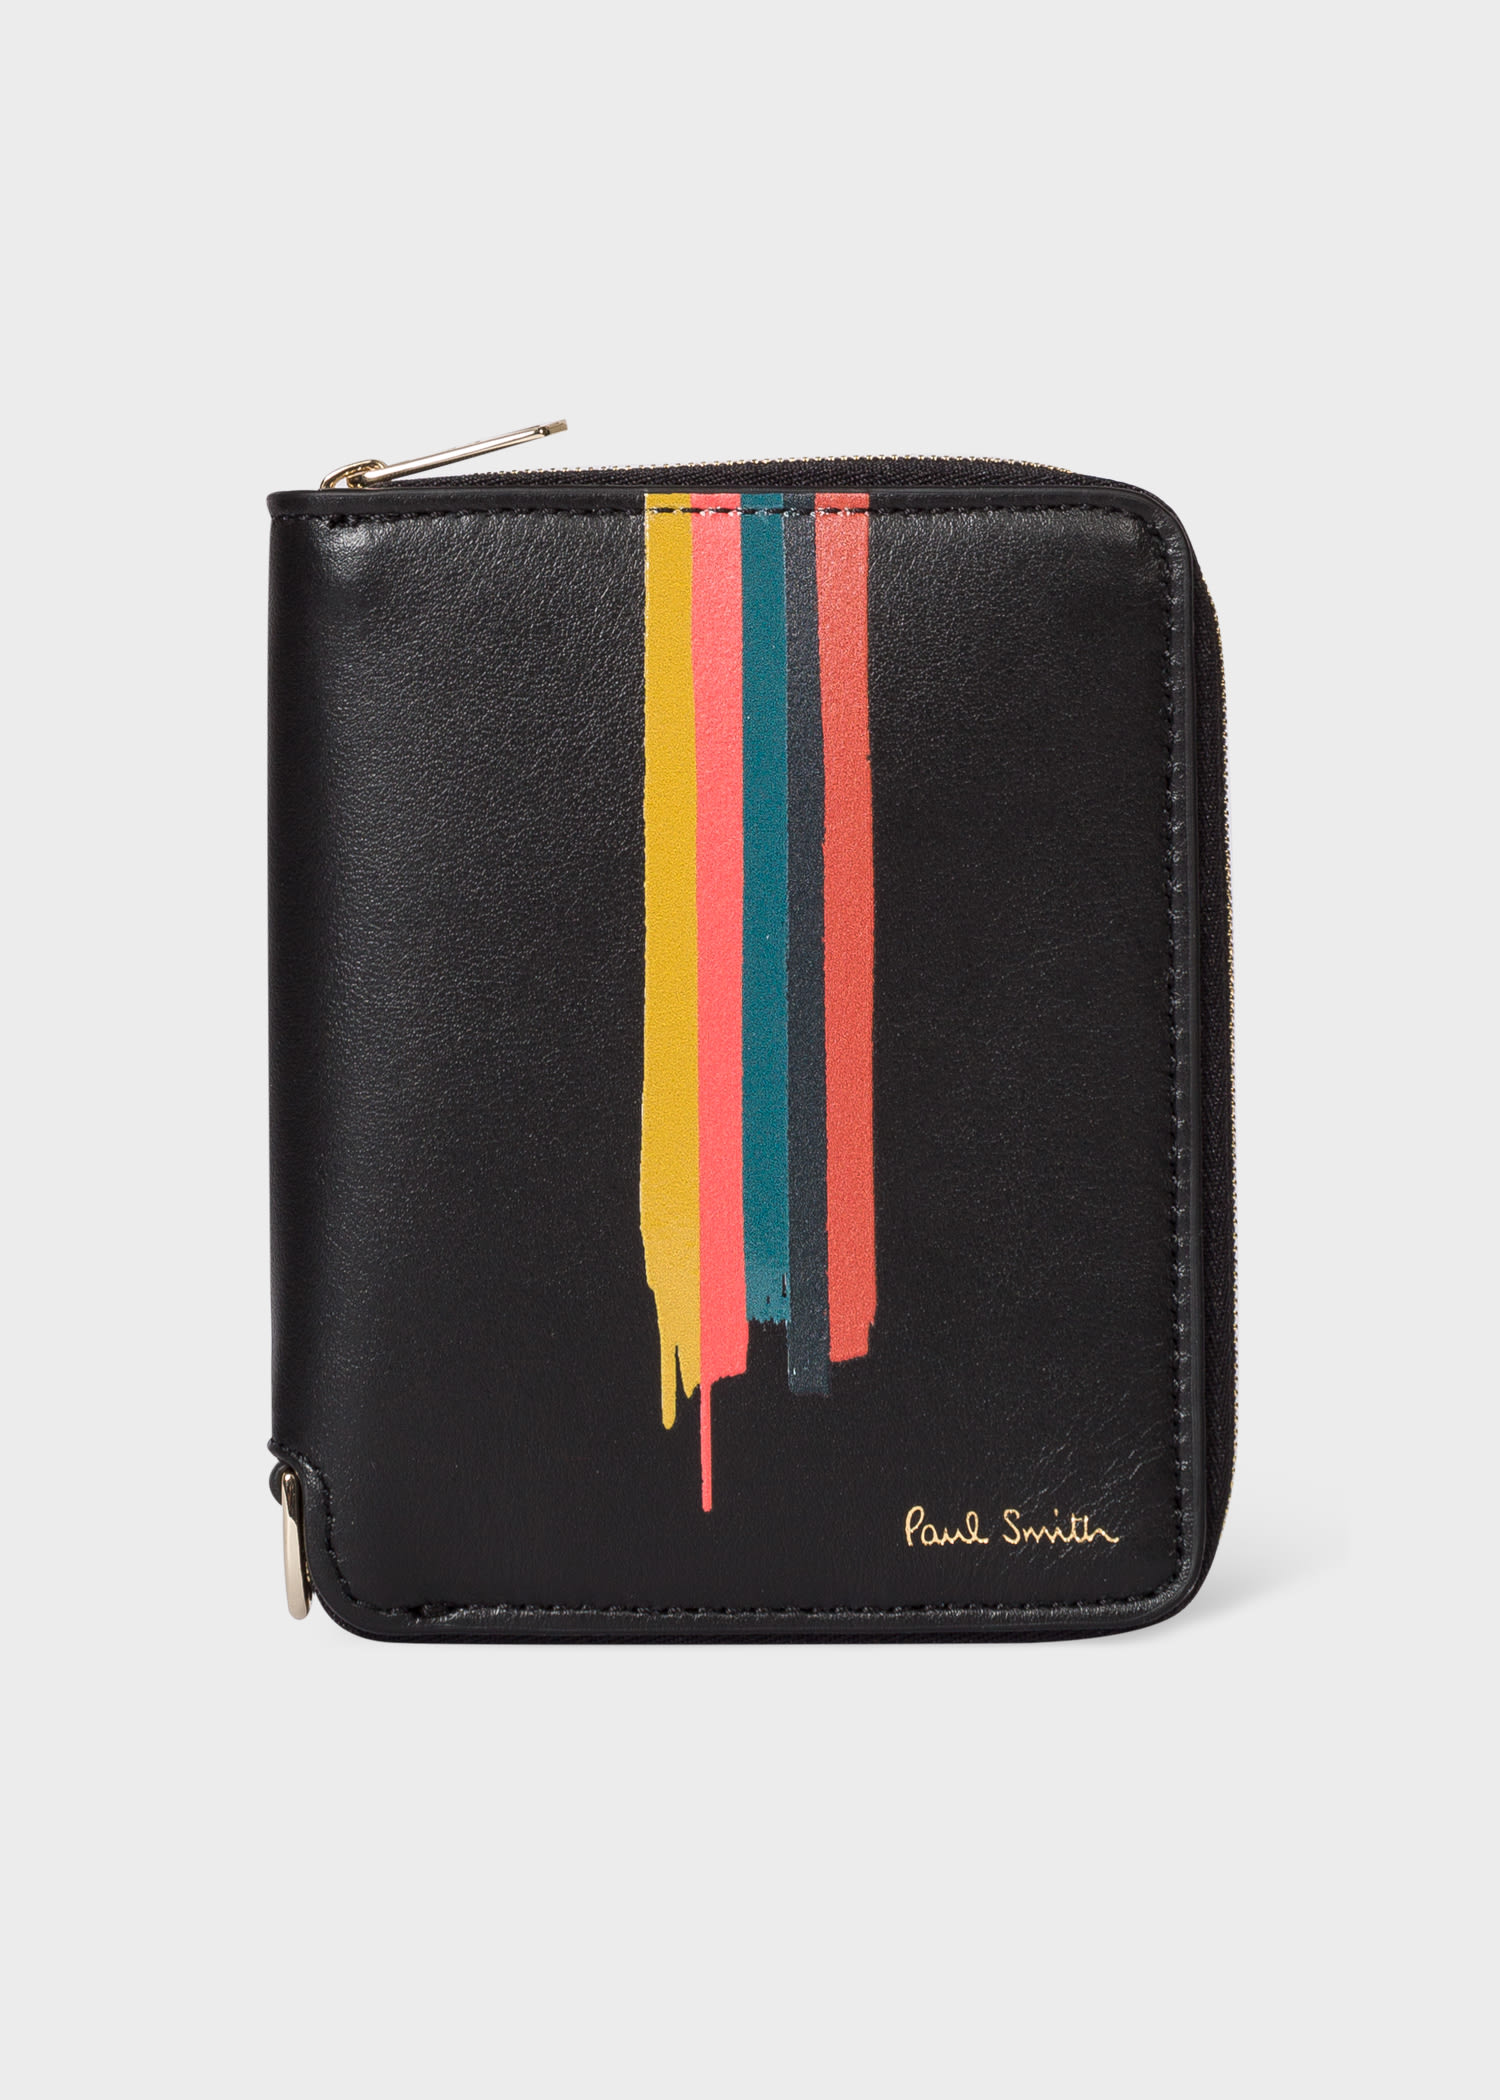 Designer Leather Wallets For Men - Paul Smith Asia